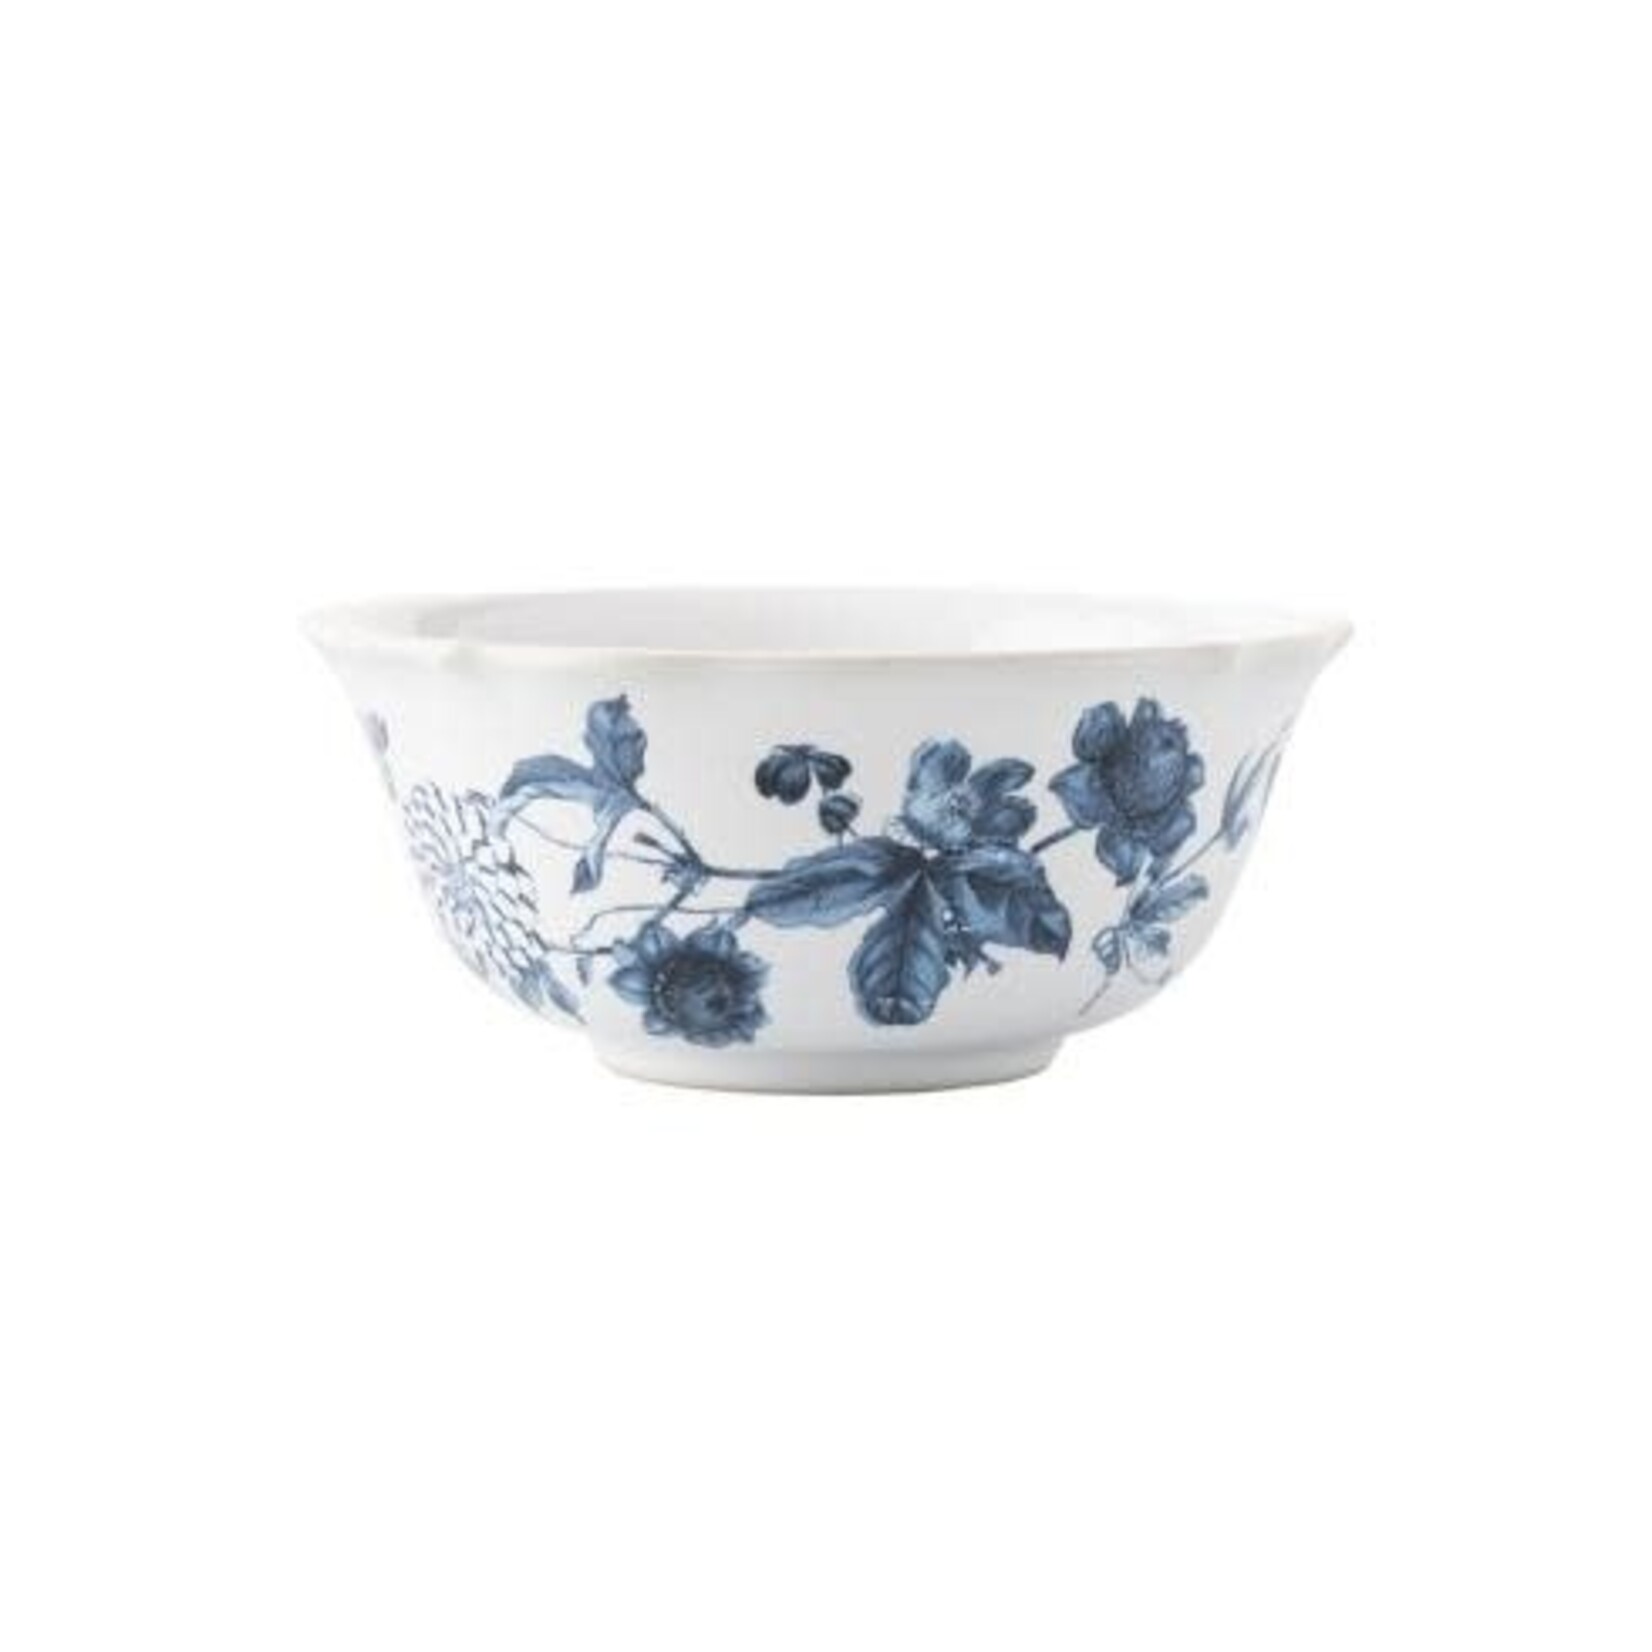 Juliska Field of Flowers Chambray Cereal/Ice Cream Bowl